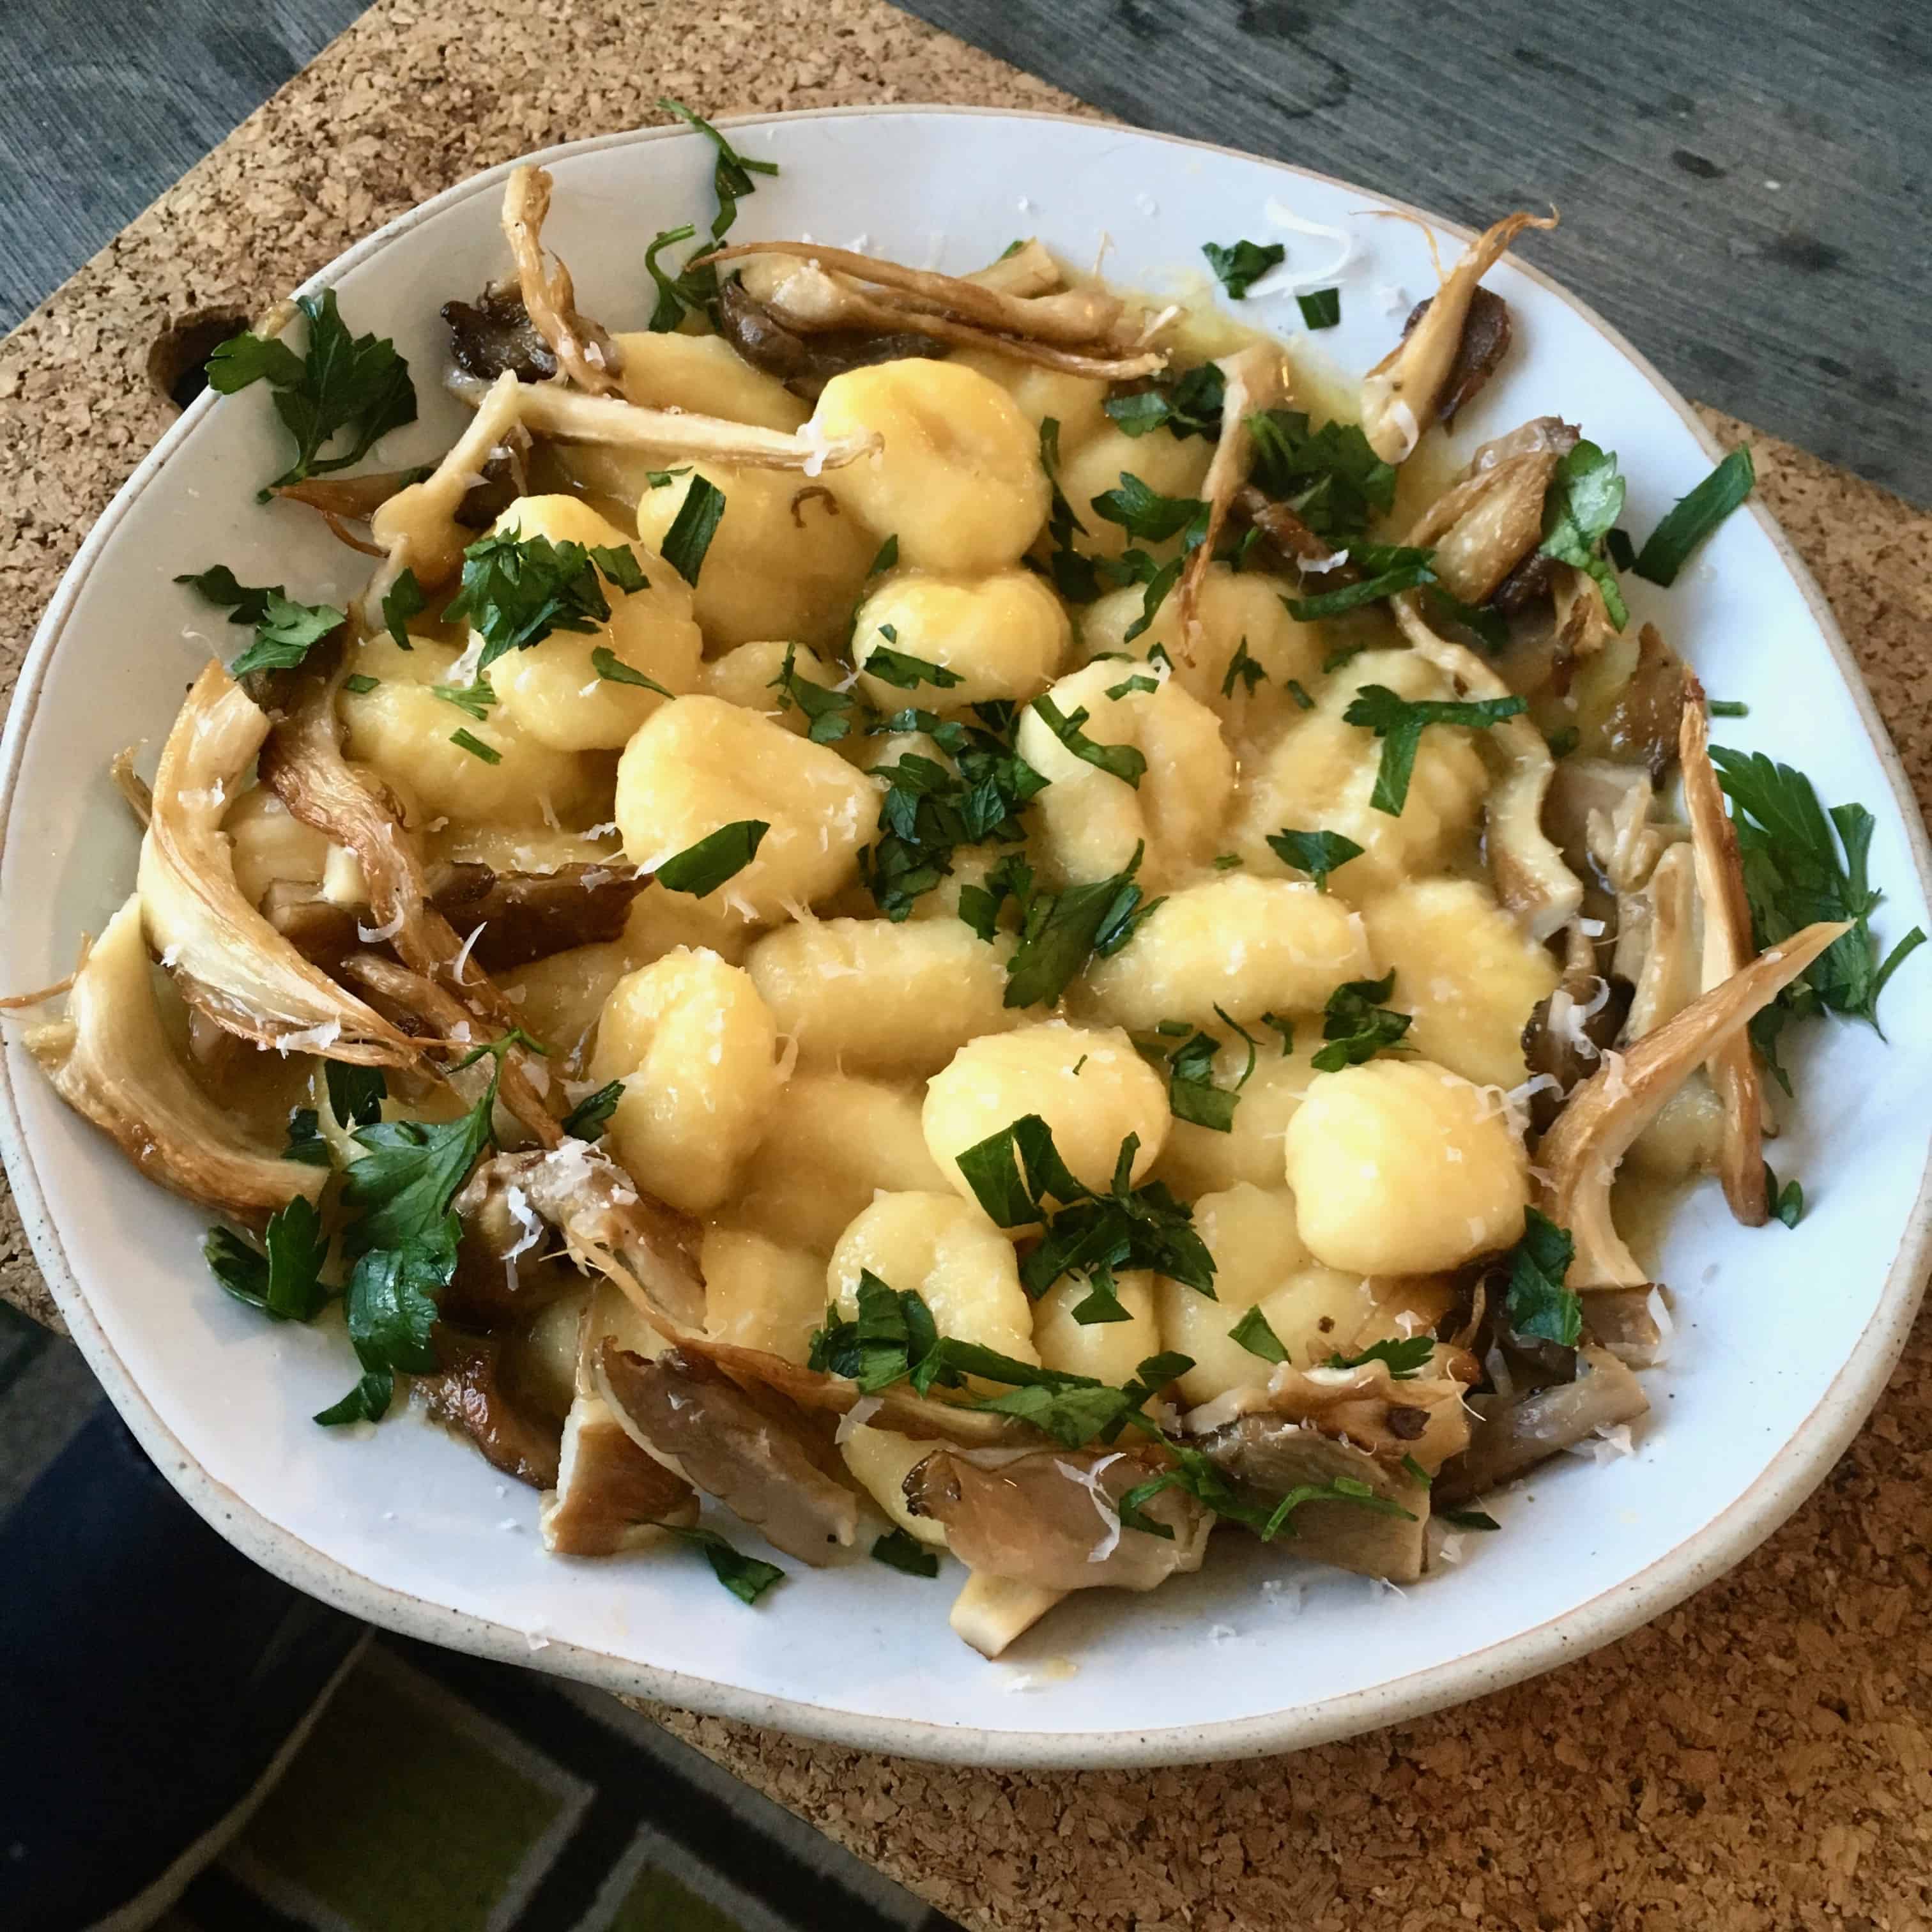 Gnocchi with White truffle Butter and Wild Mushrooms